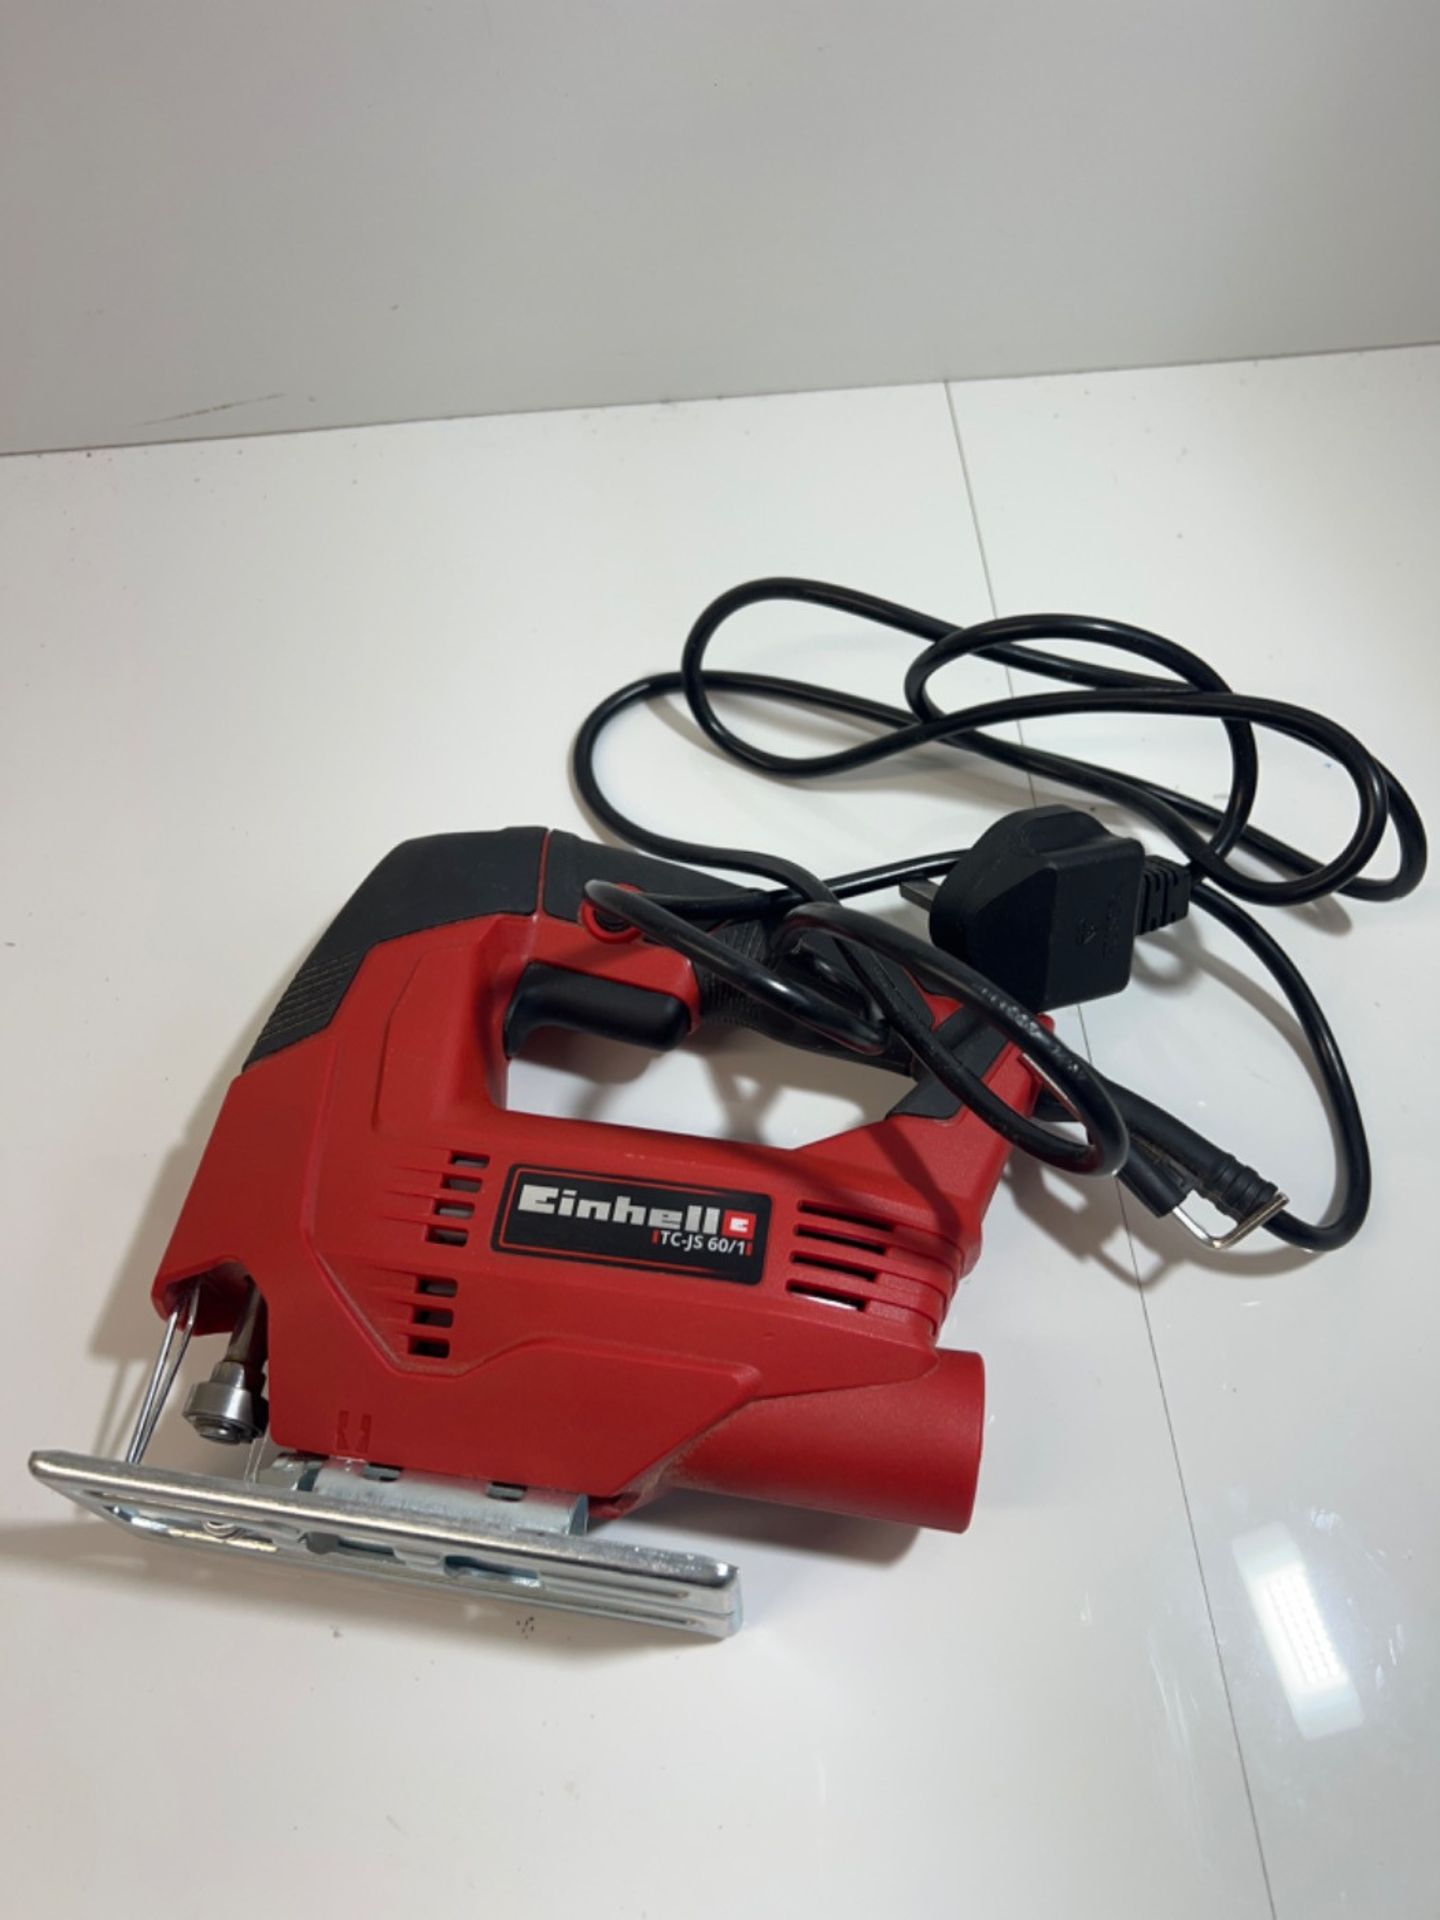 Einhell TC-JS 60/1 Electric Jigsaw | 60mm Cutting Depth, Swivel Soleplate For 45° Mitre Cuts, Elec - Image 2 of 3